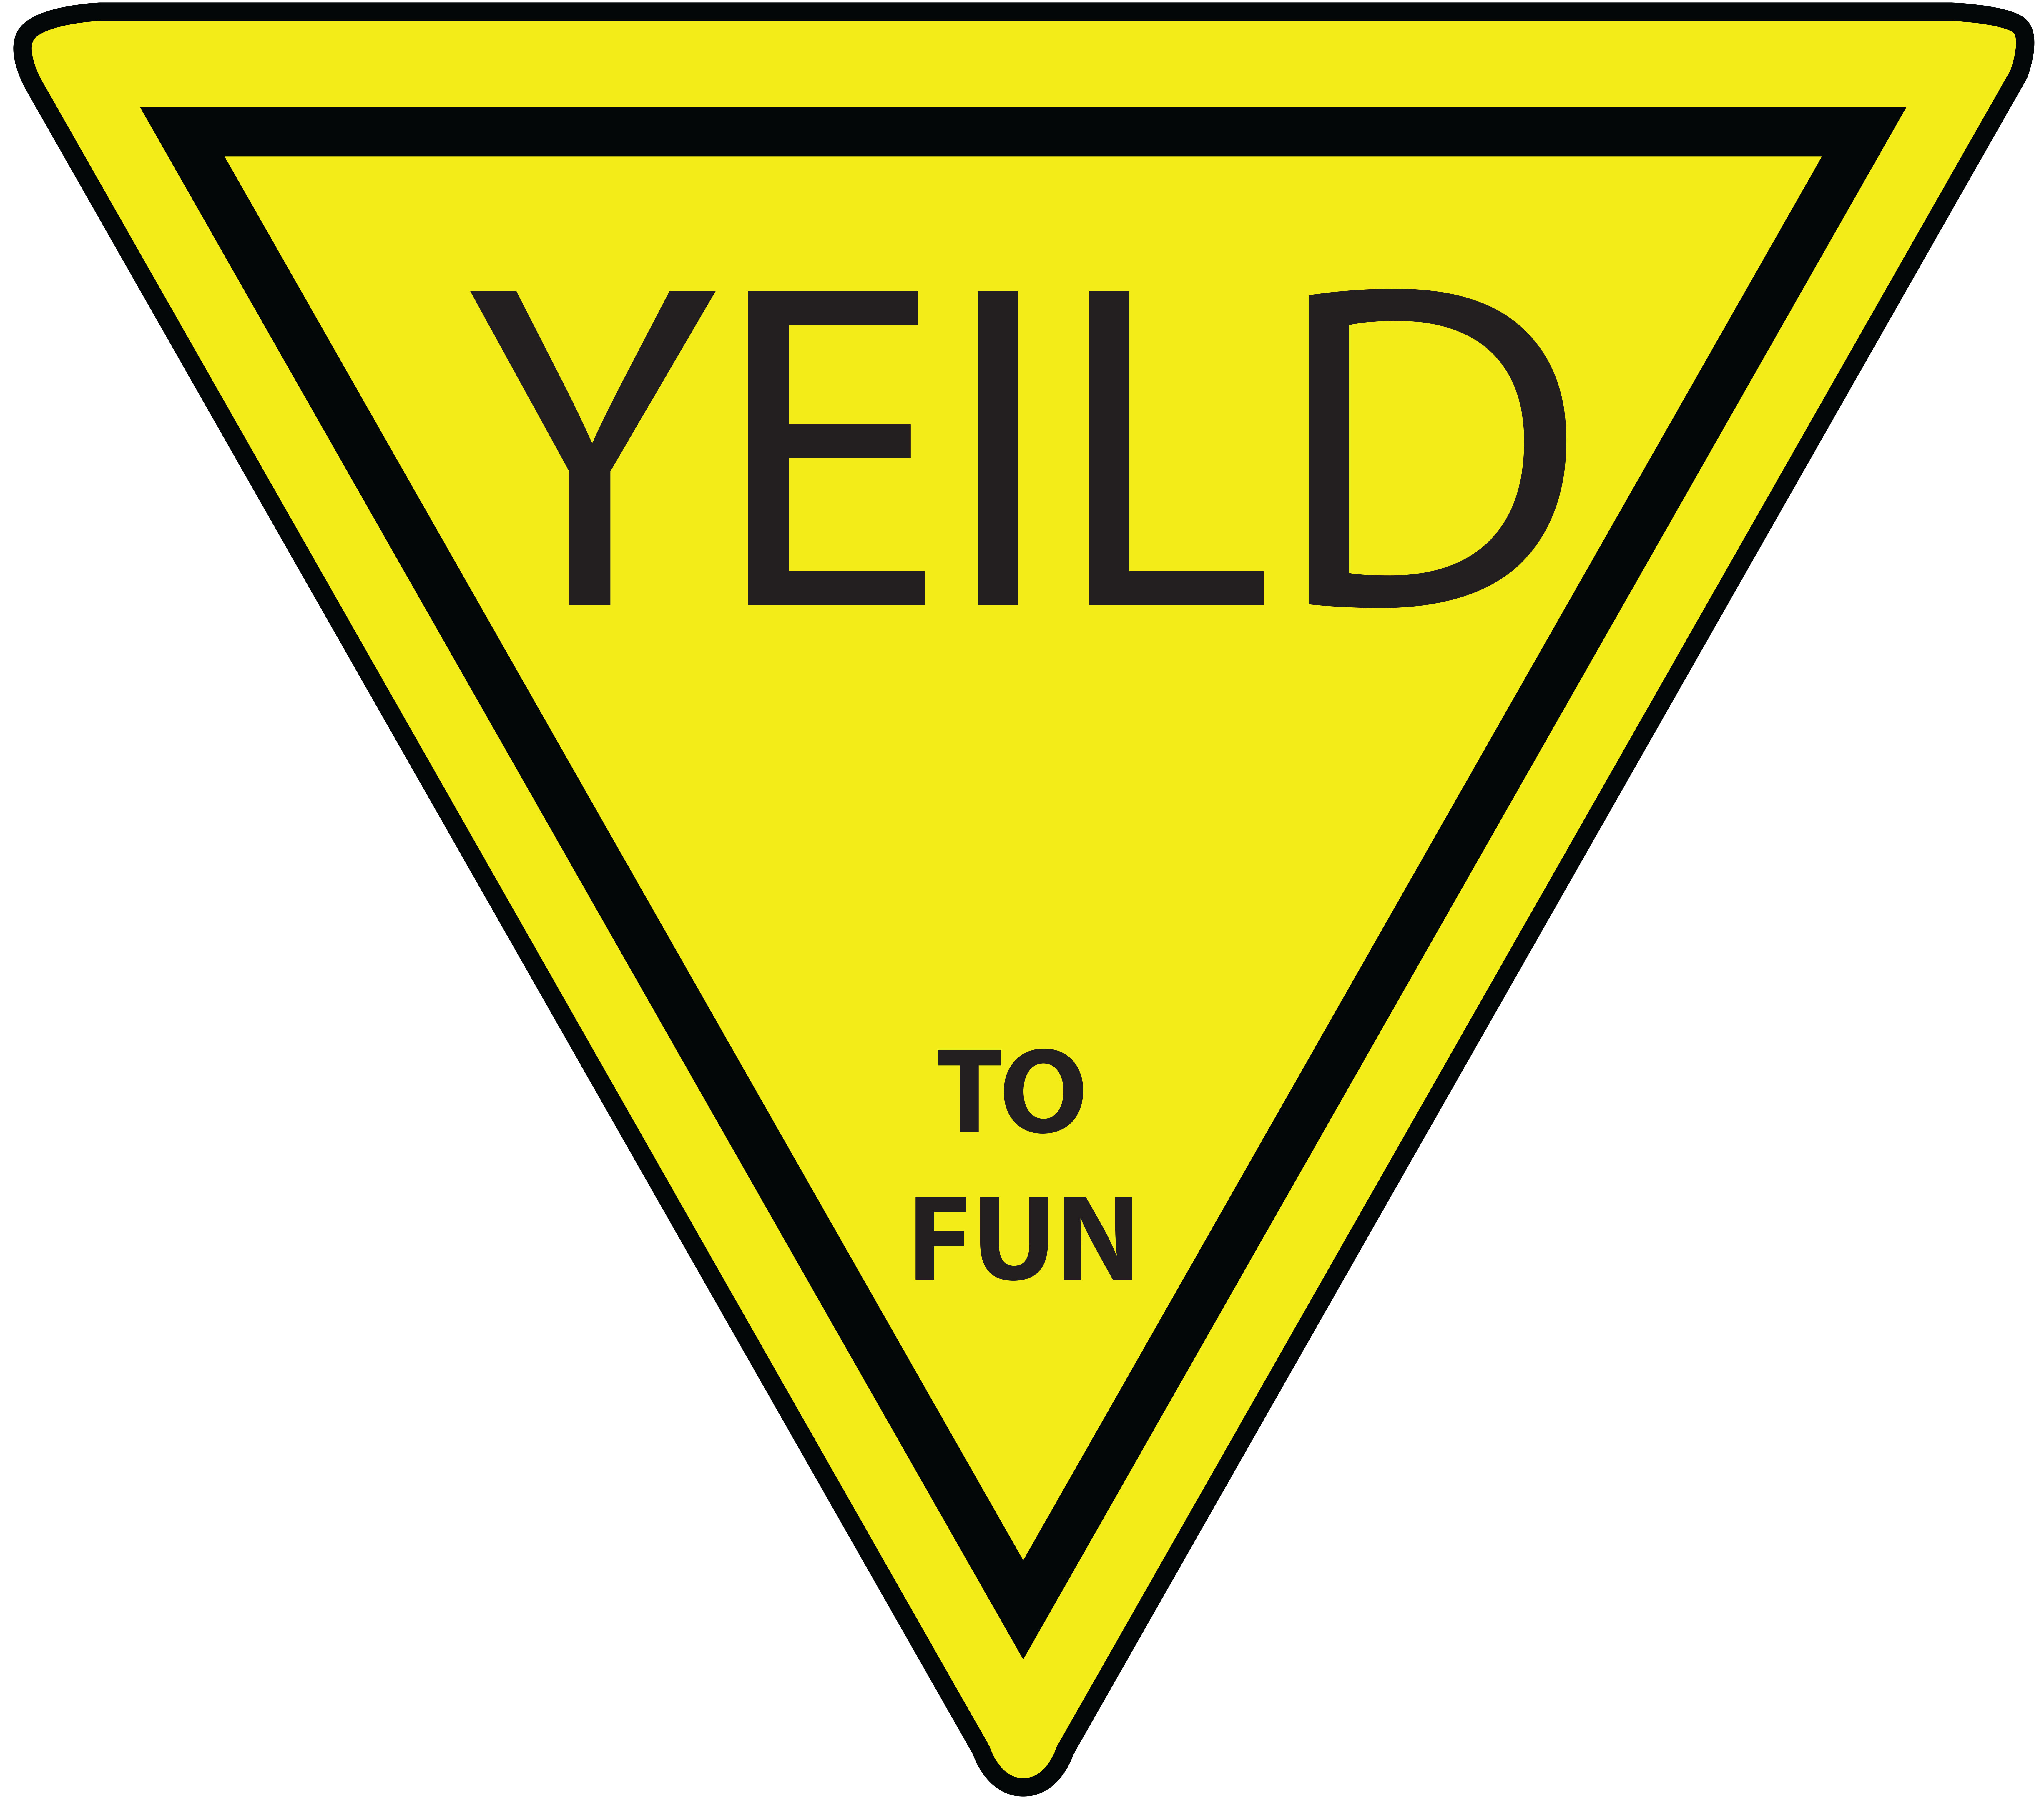 Yellow Yield Sign Clipart